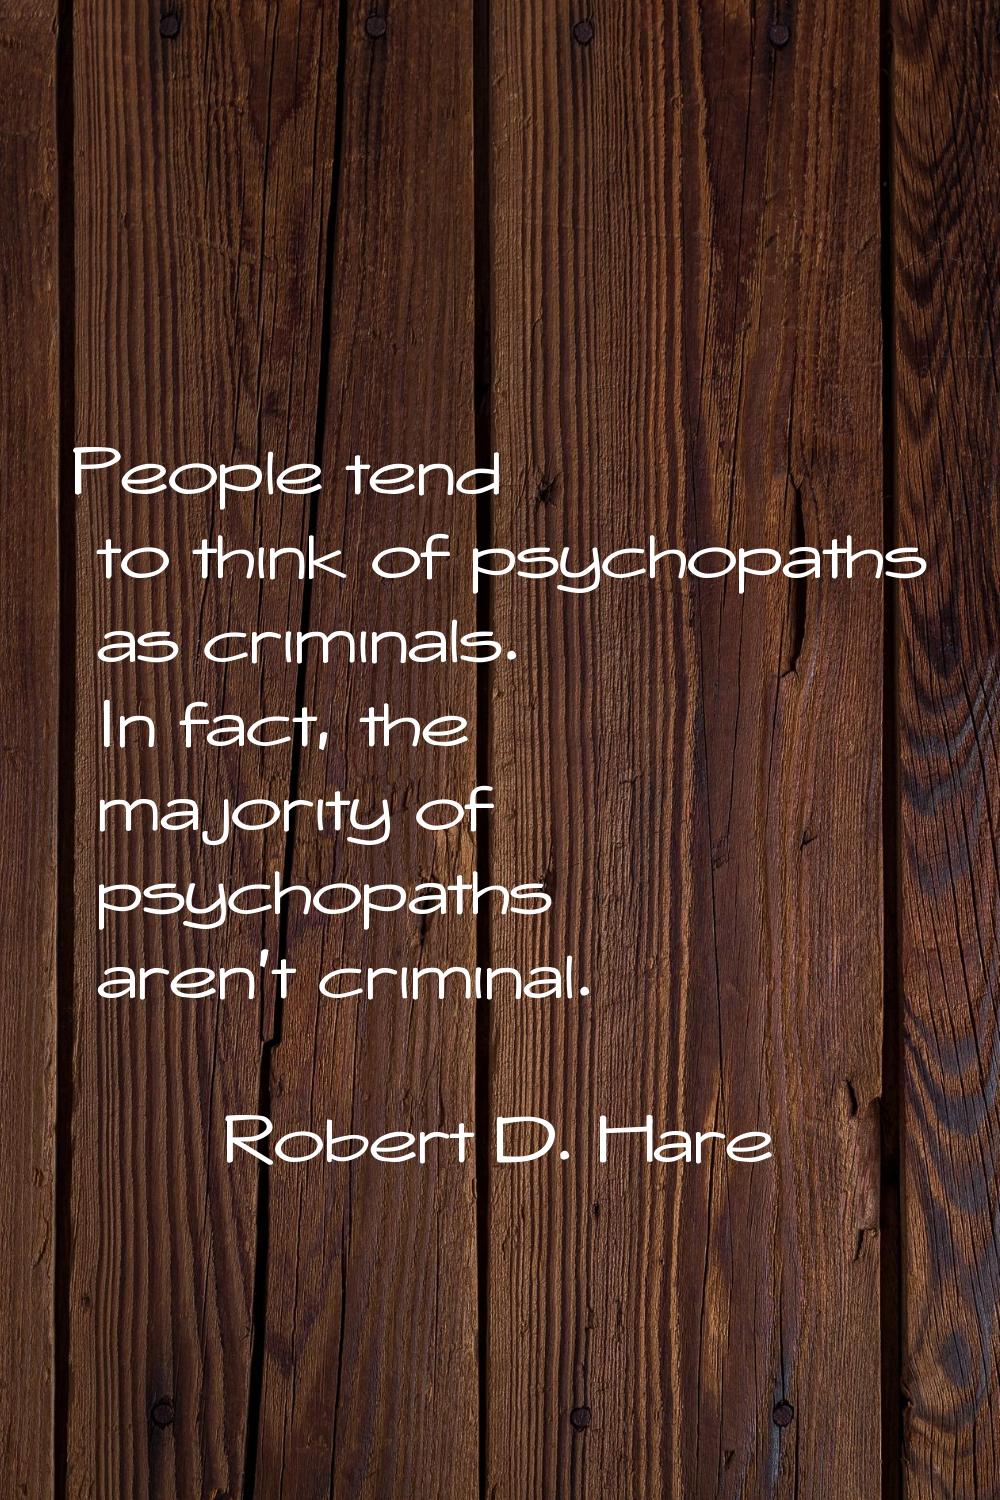 People tend to think of psychopaths as criminals. In fact, the majority of psychopaths aren't crimi